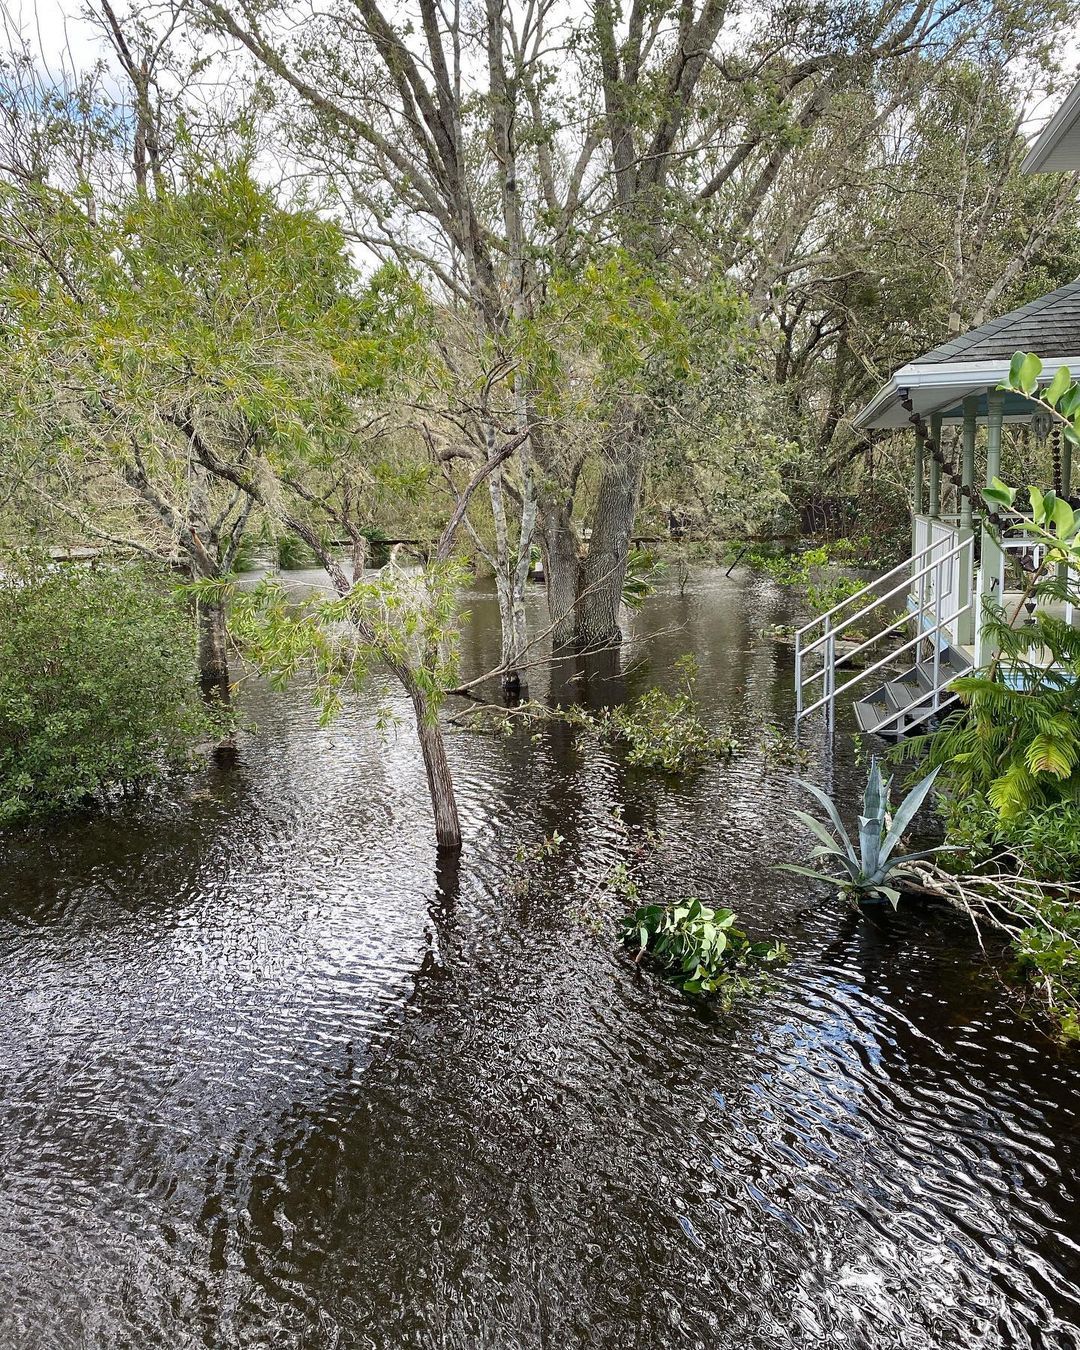 Evelyn McCorristin Peters shared a photo of her home in Myakka City, which has turned into 